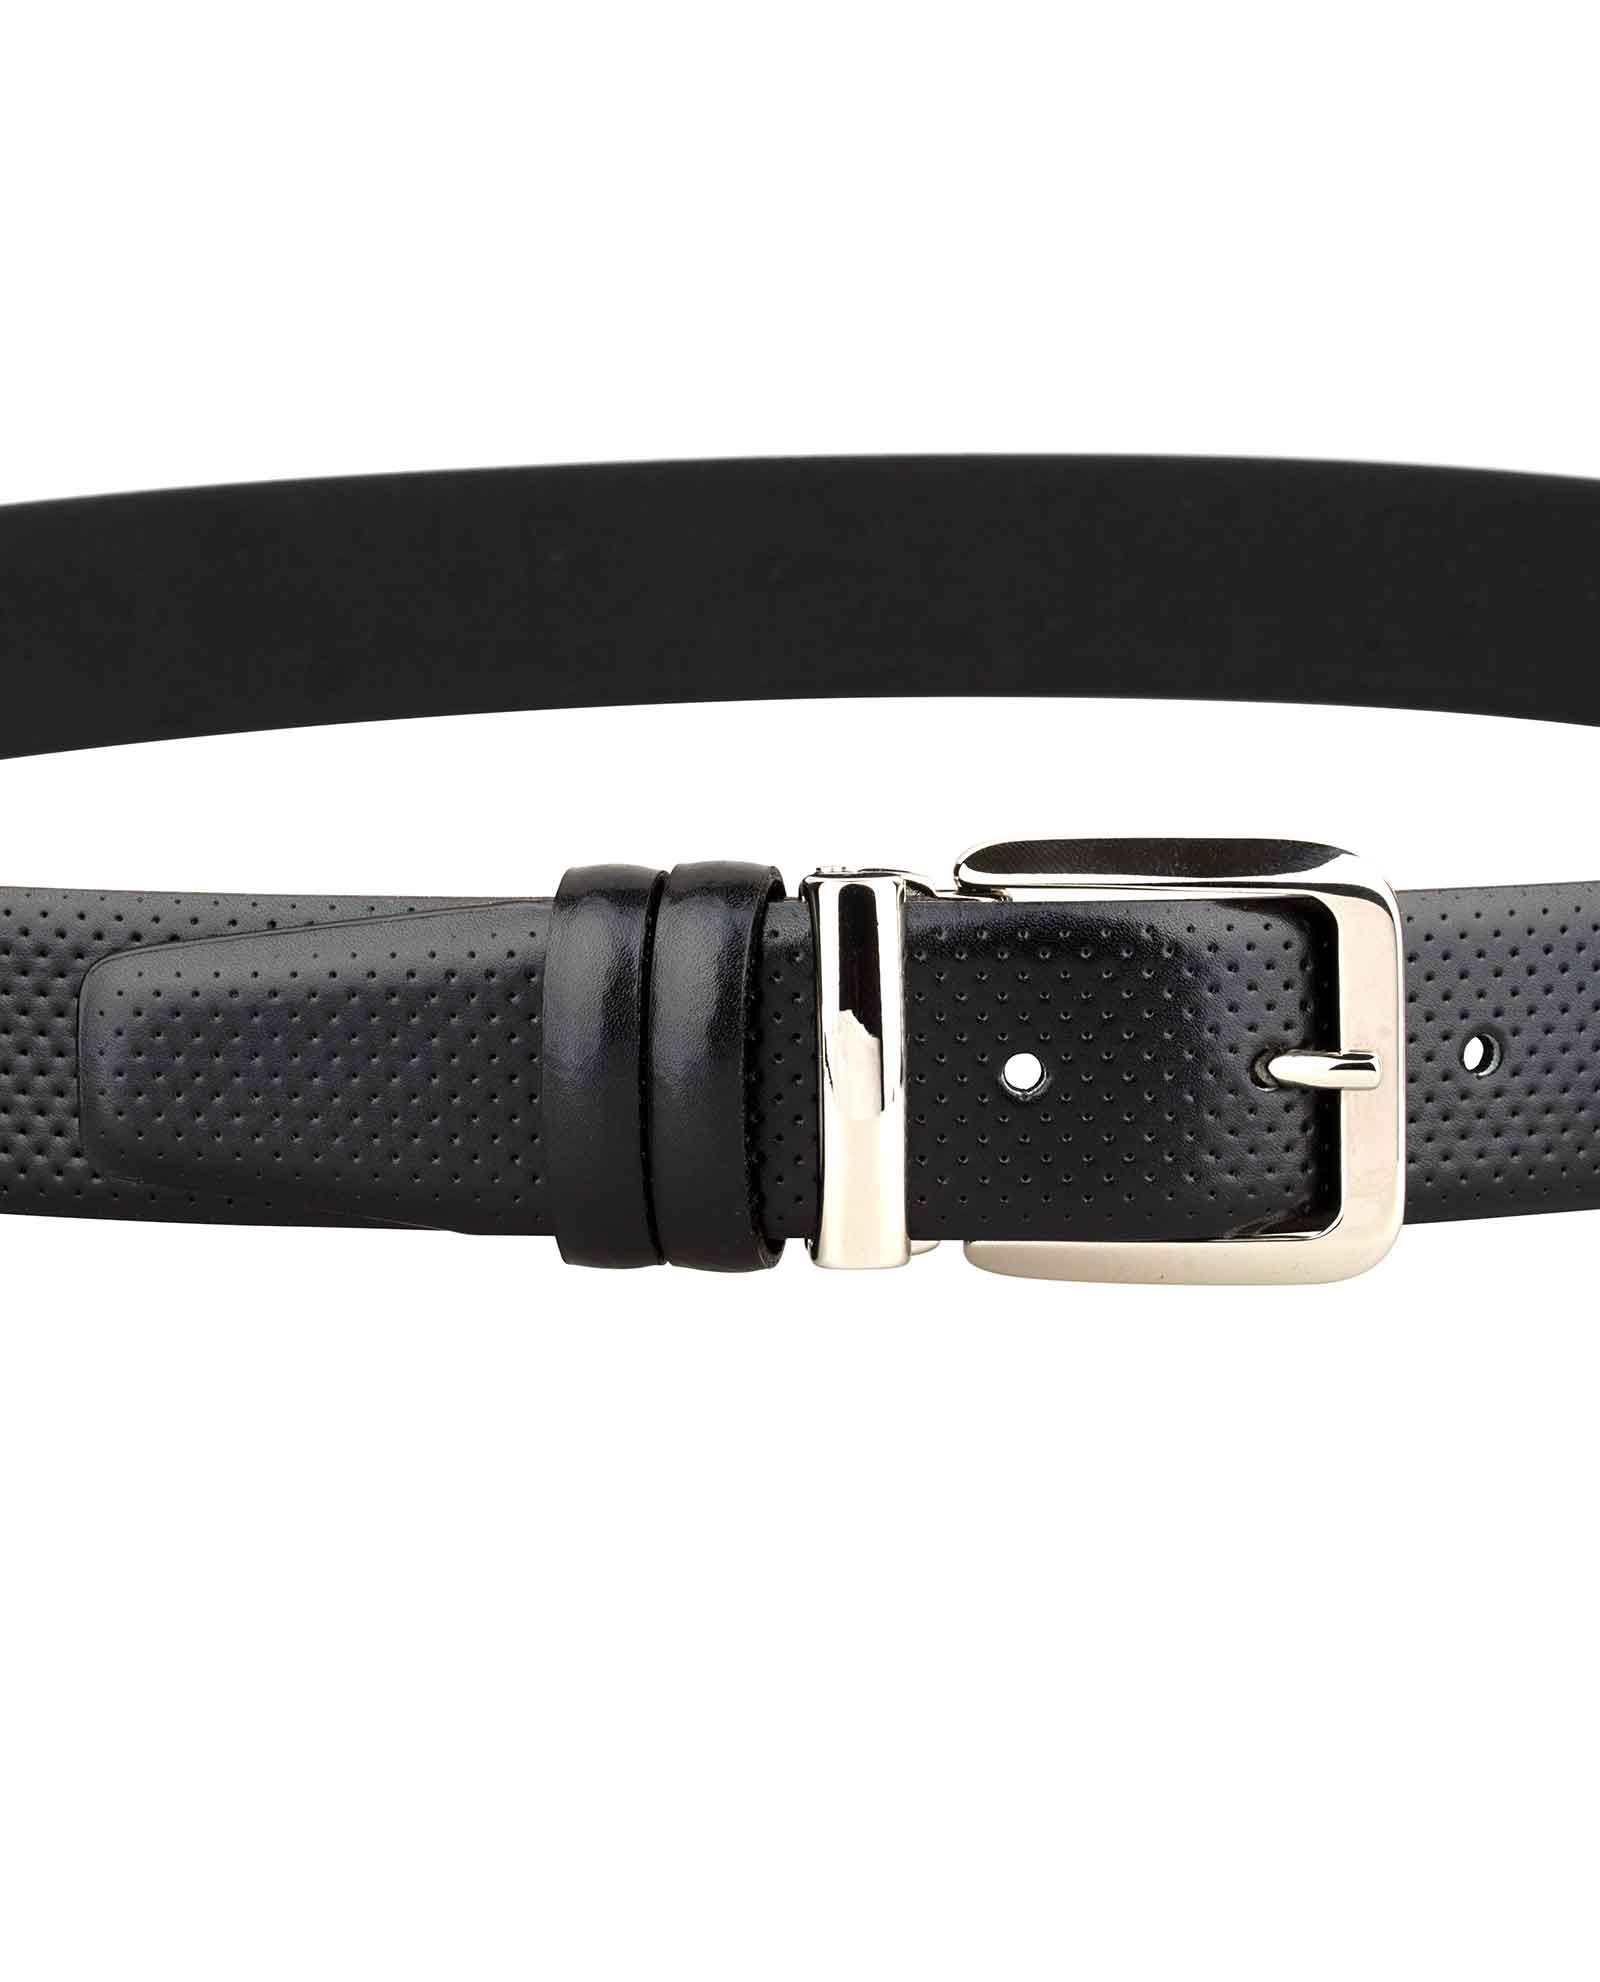 Buy Men's Black Leather Belt | Smooth Perforated | Free Shipping!